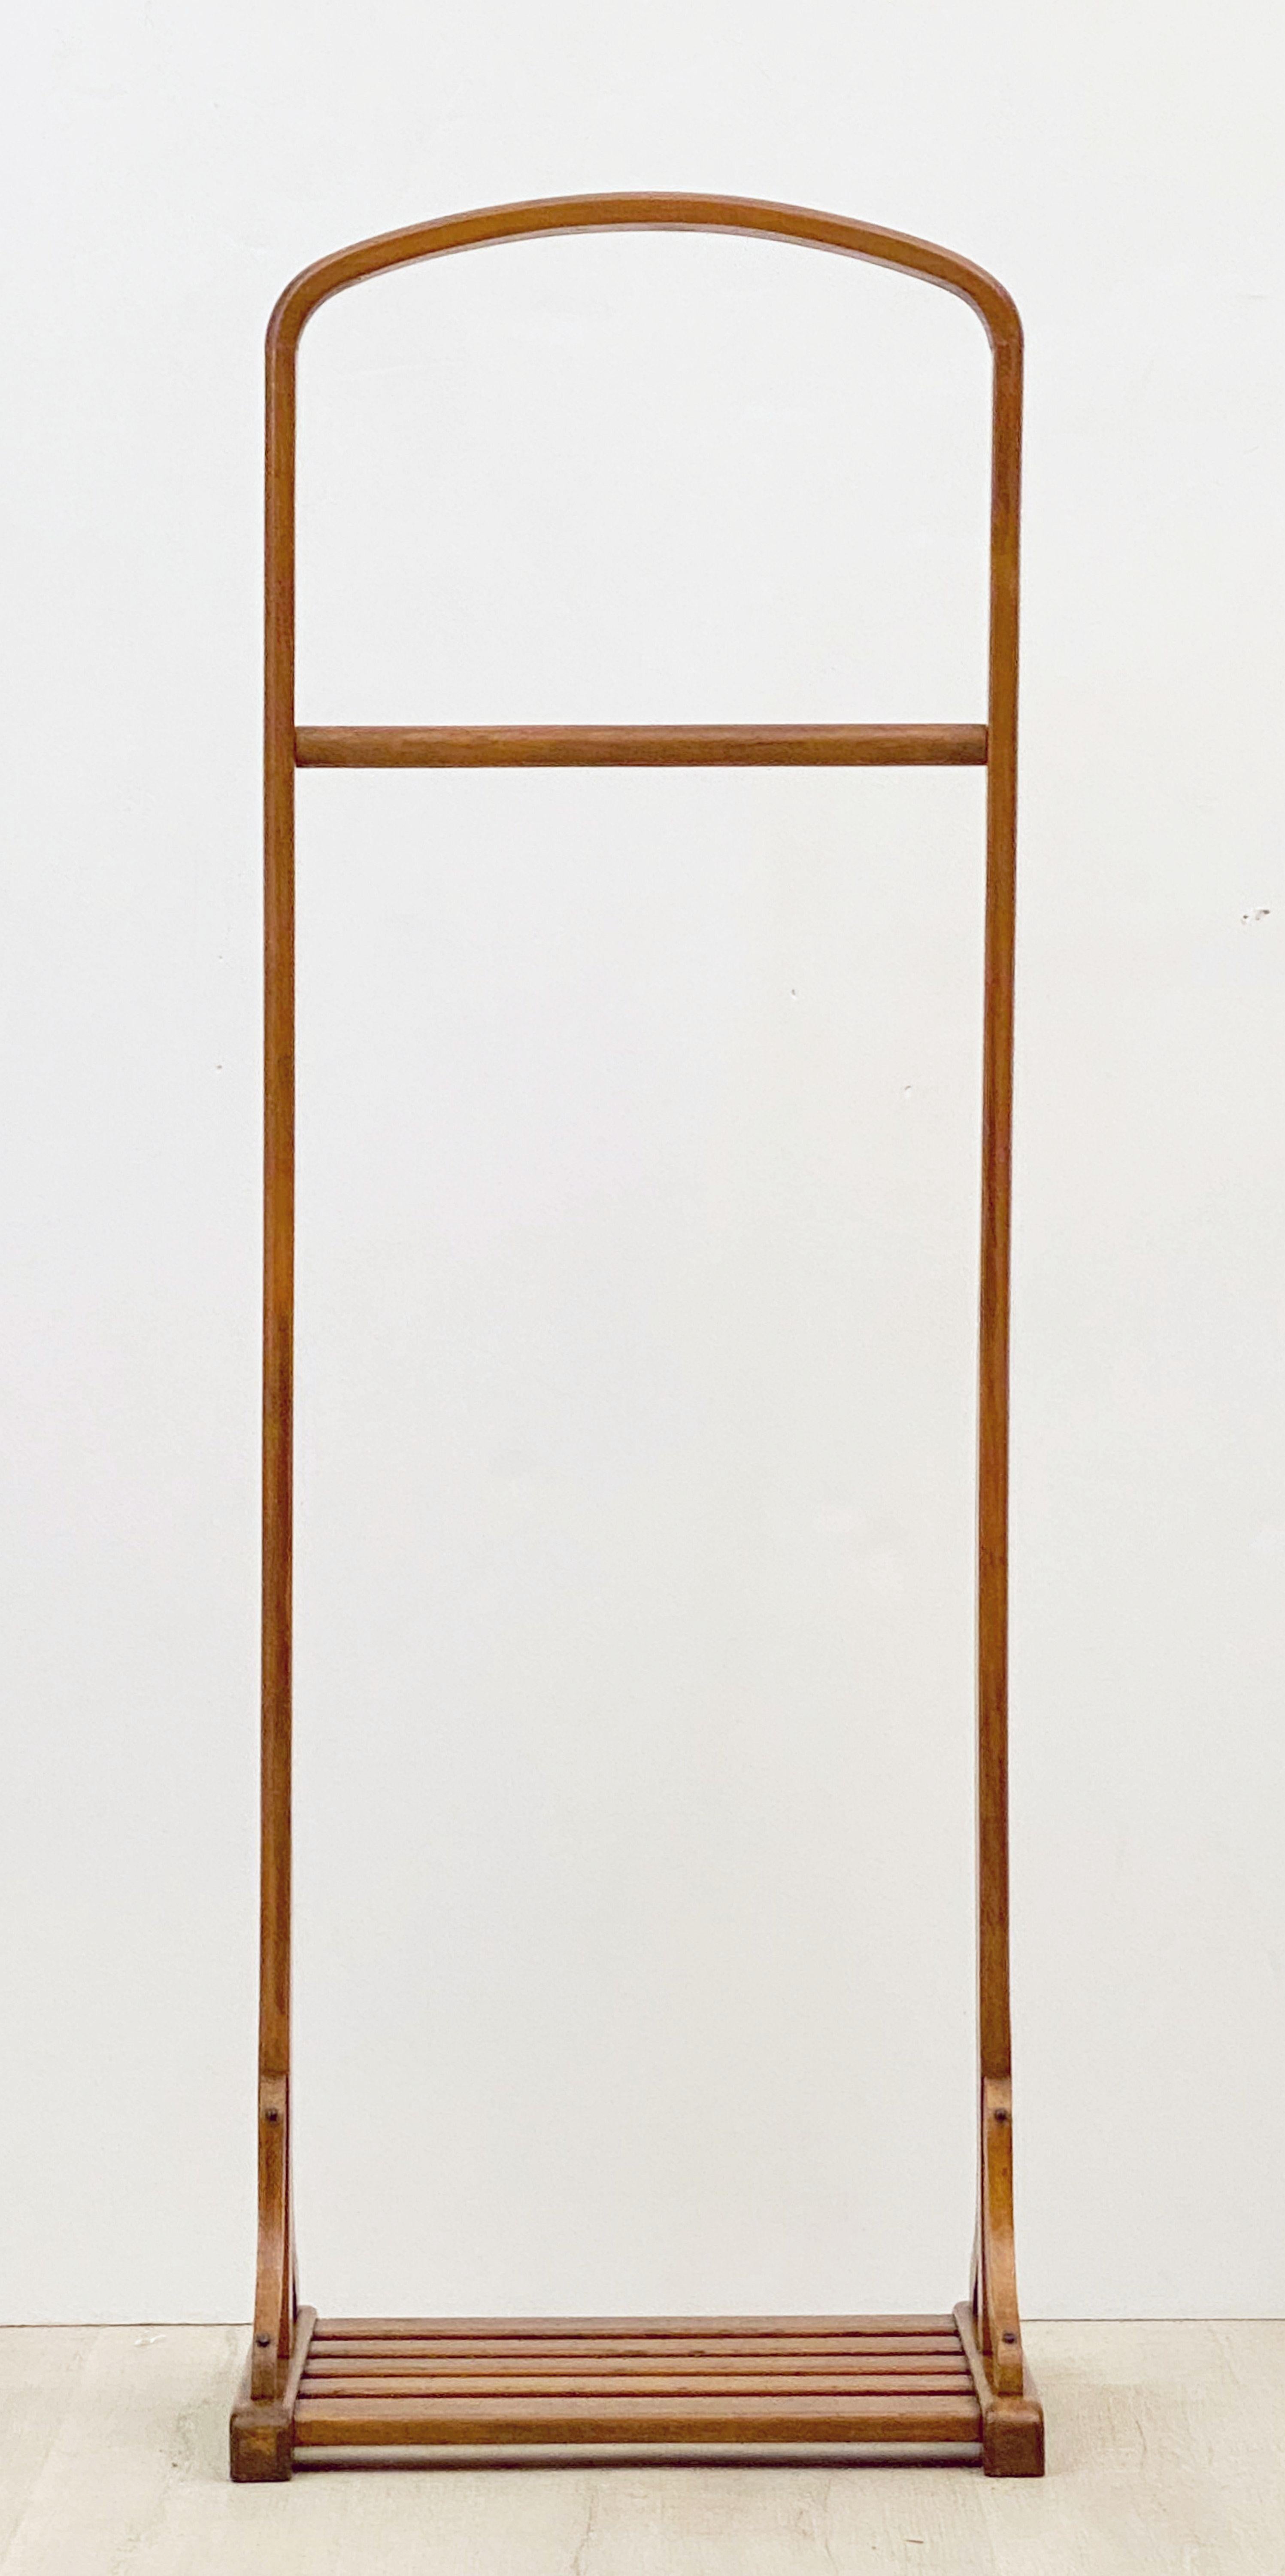 A fine English gentleman's valet or suit and coat stand clothing rack, featuring a curved bar top over a tie bar and resting on a slatted base.